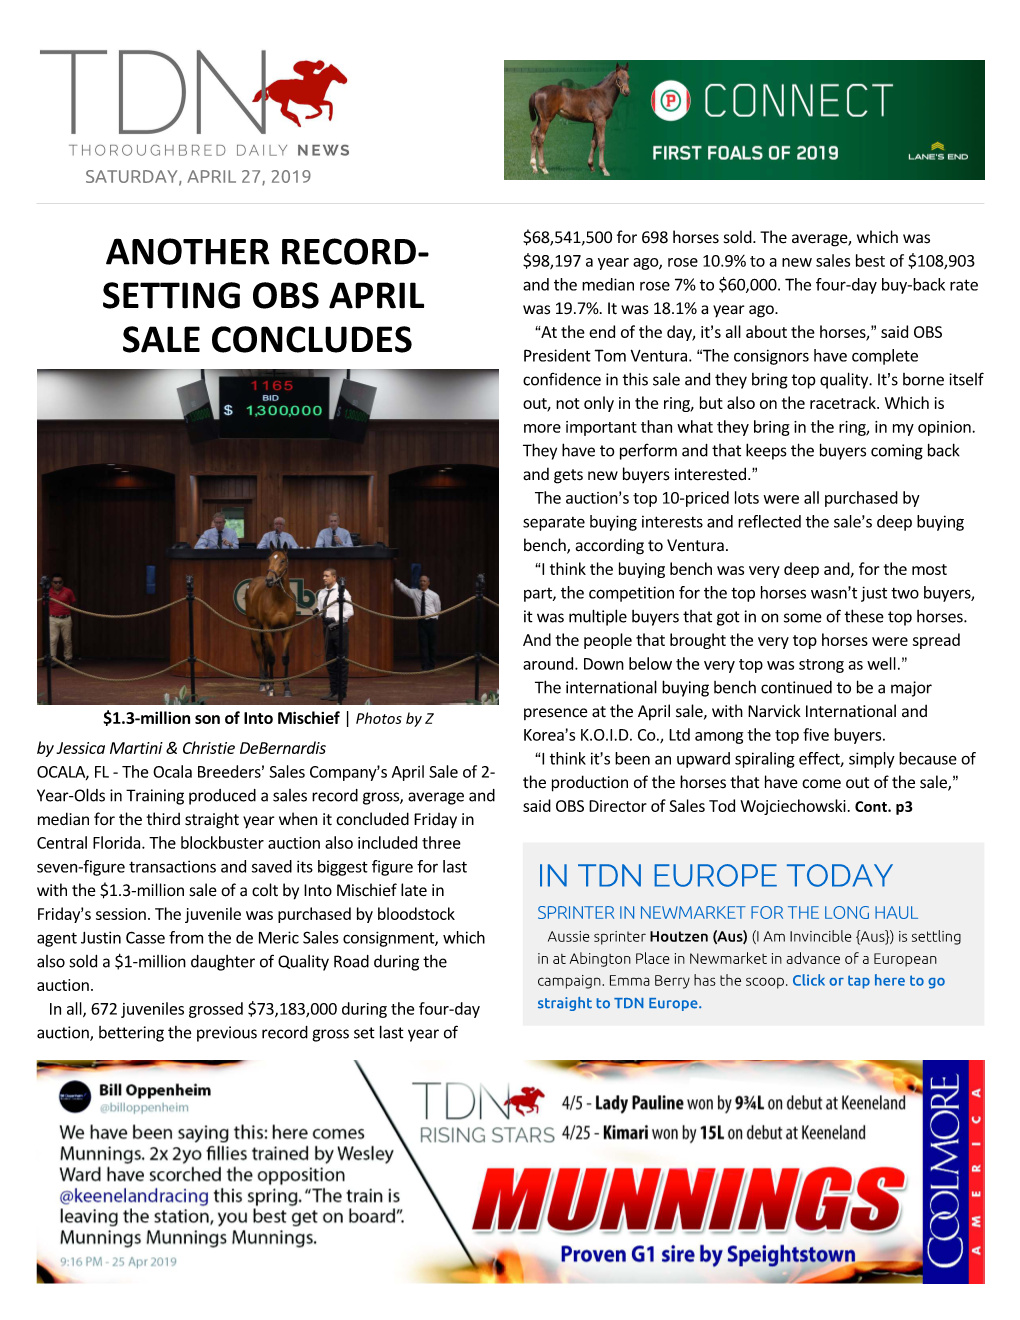 Another Record- Setting Obs April Sale Concludes